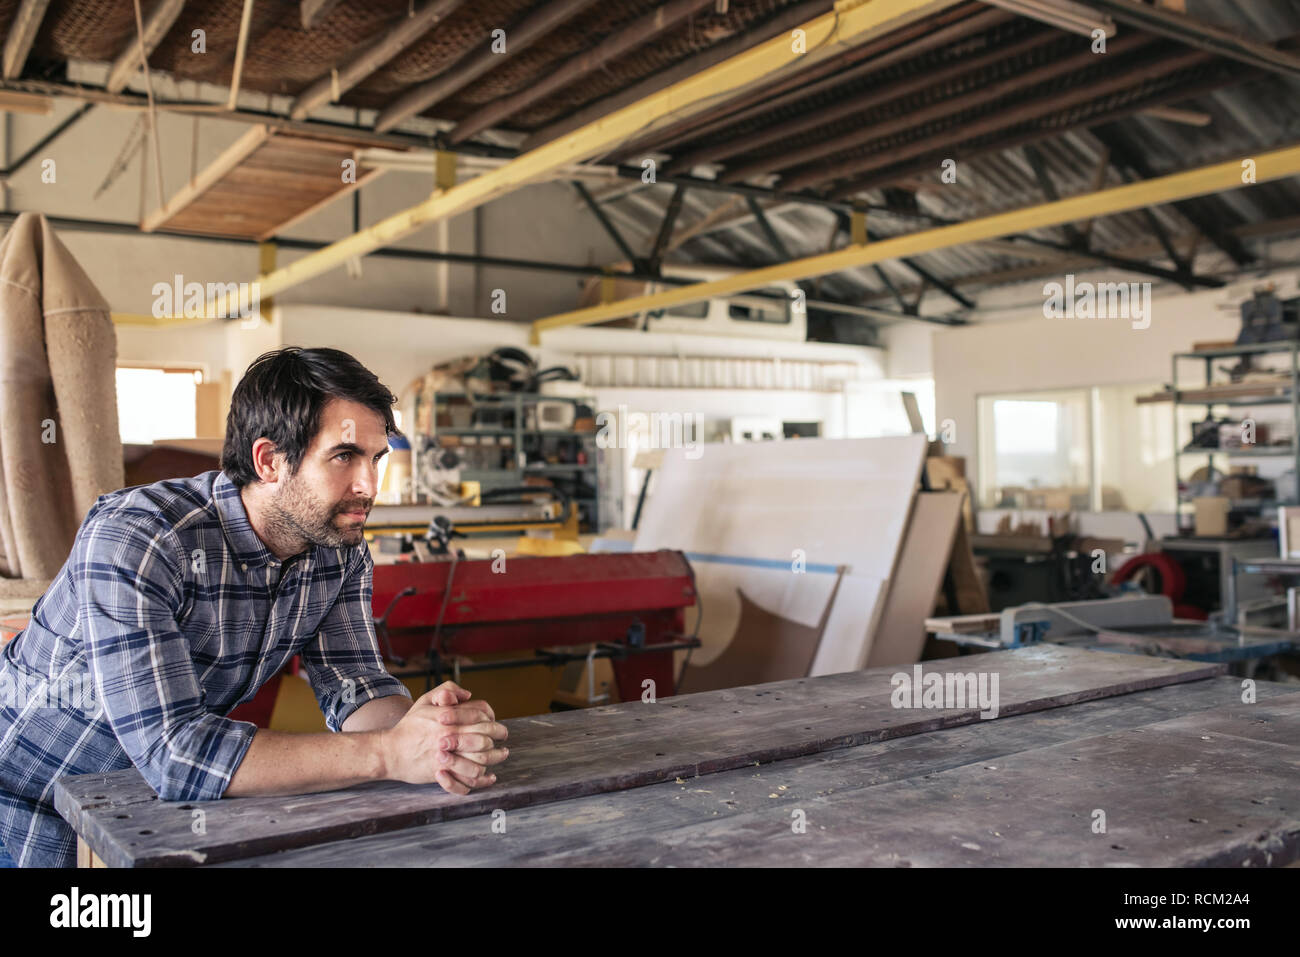 Woodworker leaning on a workshop bench deep in thought Stock Photo